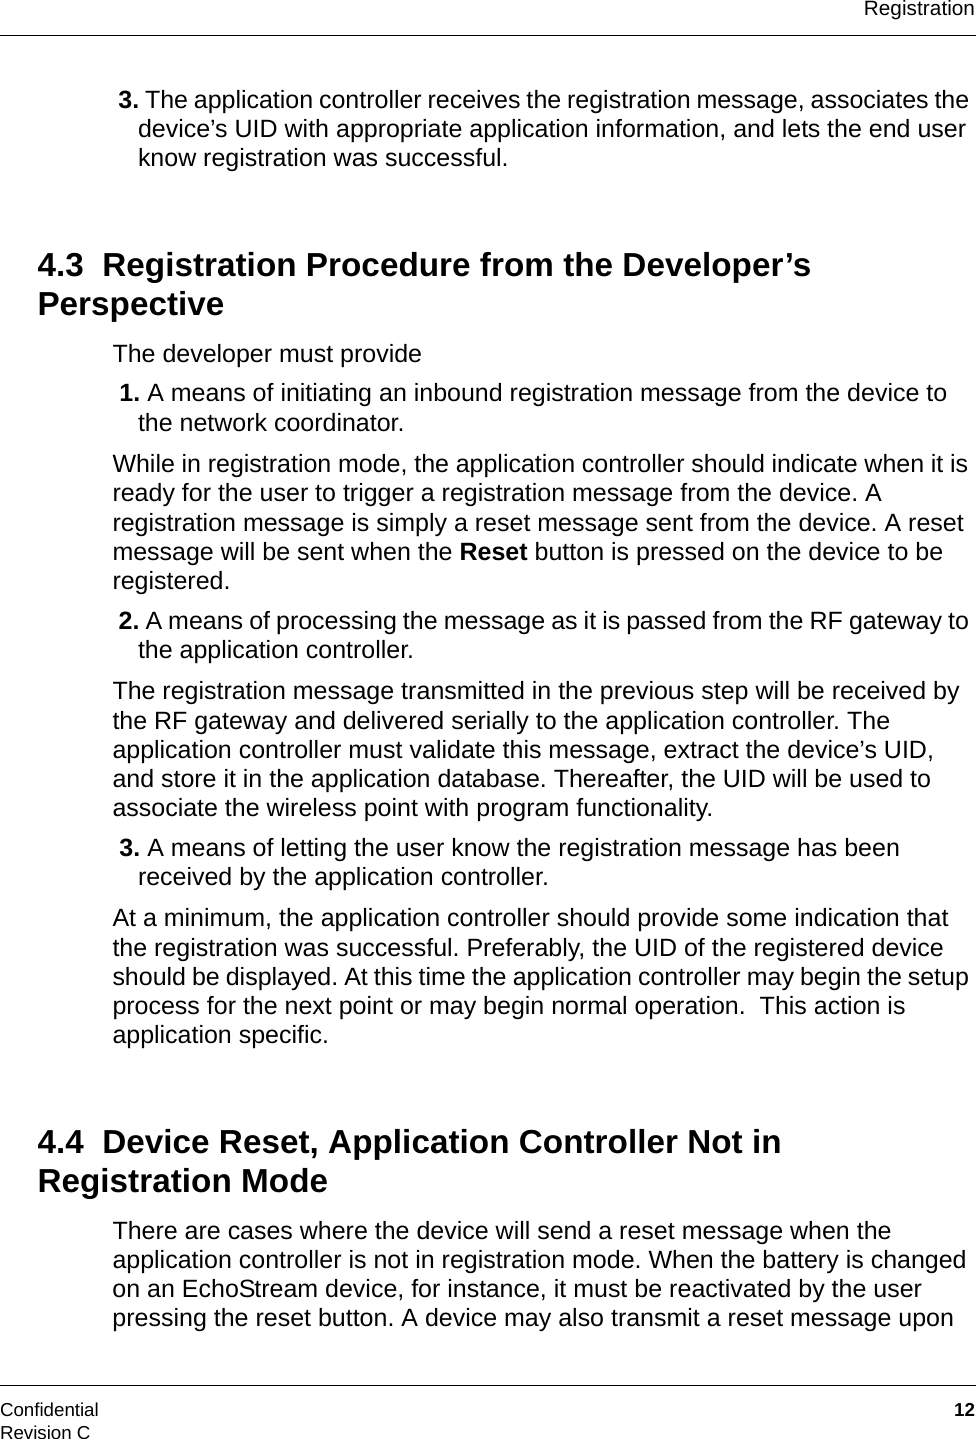 RegistrationConfidential  12Revision C 3. The application controller receives the registration message, associates the device’s UID with appropriate application information, and lets the end user know registration was successful.4.3  Registration Procedure from the Developer’s PerspectiveThe developer must provide 1. A means of initiating an inbound registration message from the device to the network coordinator.While in registration mode, the application controller should indicate when it is ready for the user to trigger a registration message from the device. A registration message is simply a reset message sent from the device. A reset message will be sent when the Reset button is pressed on the device to be registered. 2. A means of processing the message as it is passed from the RF gateway to the application controller.The registration message transmitted in the previous step will be received by the RF gateway and delivered serially to the application controller. The application controller must validate this message, extract the device’s UID, and store it in the application database. Thereafter, the UID will be used to associate the wireless point with program functionality. 3. A means of letting the user know the registration message has been received by the application controller.At a minimum, the application controller should provide some indication that the registration was successful. Preferably, the UID of the registered device should be displayed. At this time the application controller may begin the setup process for the next point or may begin normal operation.  This action is application specific.4.4  Device Reset, Application Controller Not in Registration ModeThere are cases where the device will send a reset message when the application controller is not in registration mode. When the battery is changed on an EchoStream device, for instance, it must be reactivated by the user pressing the reset button. A device may also transmit a reset message upon 